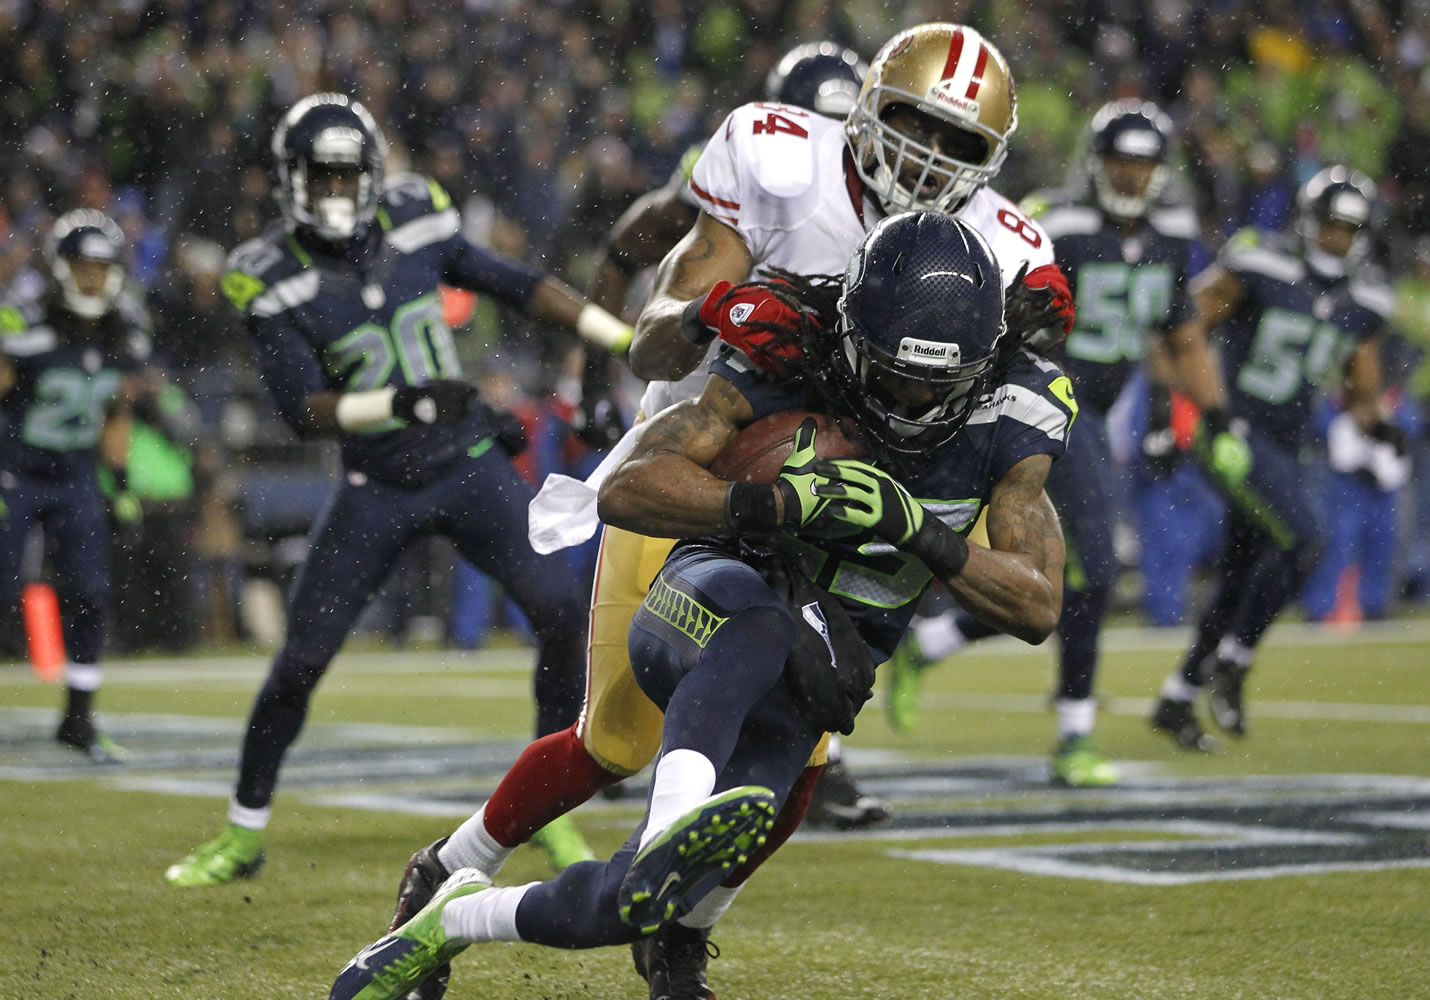 Seattle Seahawks' Richard Sherman comes down with an interception ahead of San Francisco 49ers' wide receiver Randy Moss in the second half Sunday.